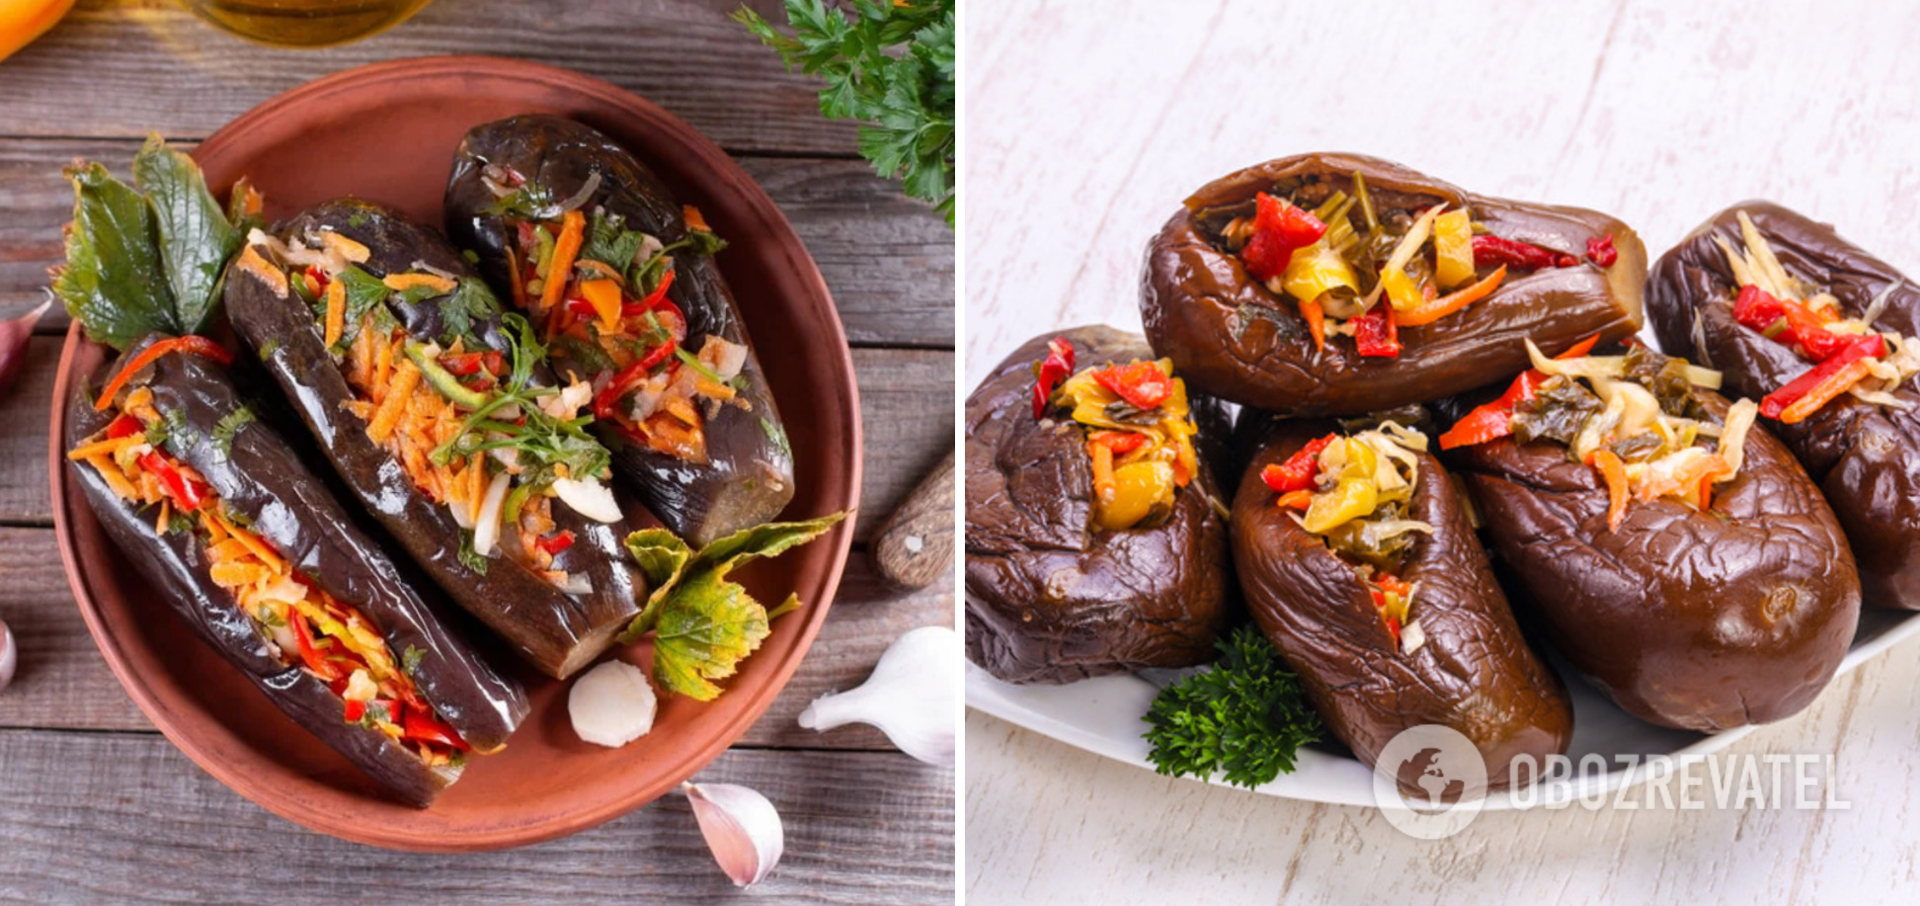 Pickled stuffed eggplants with carrots and peppers